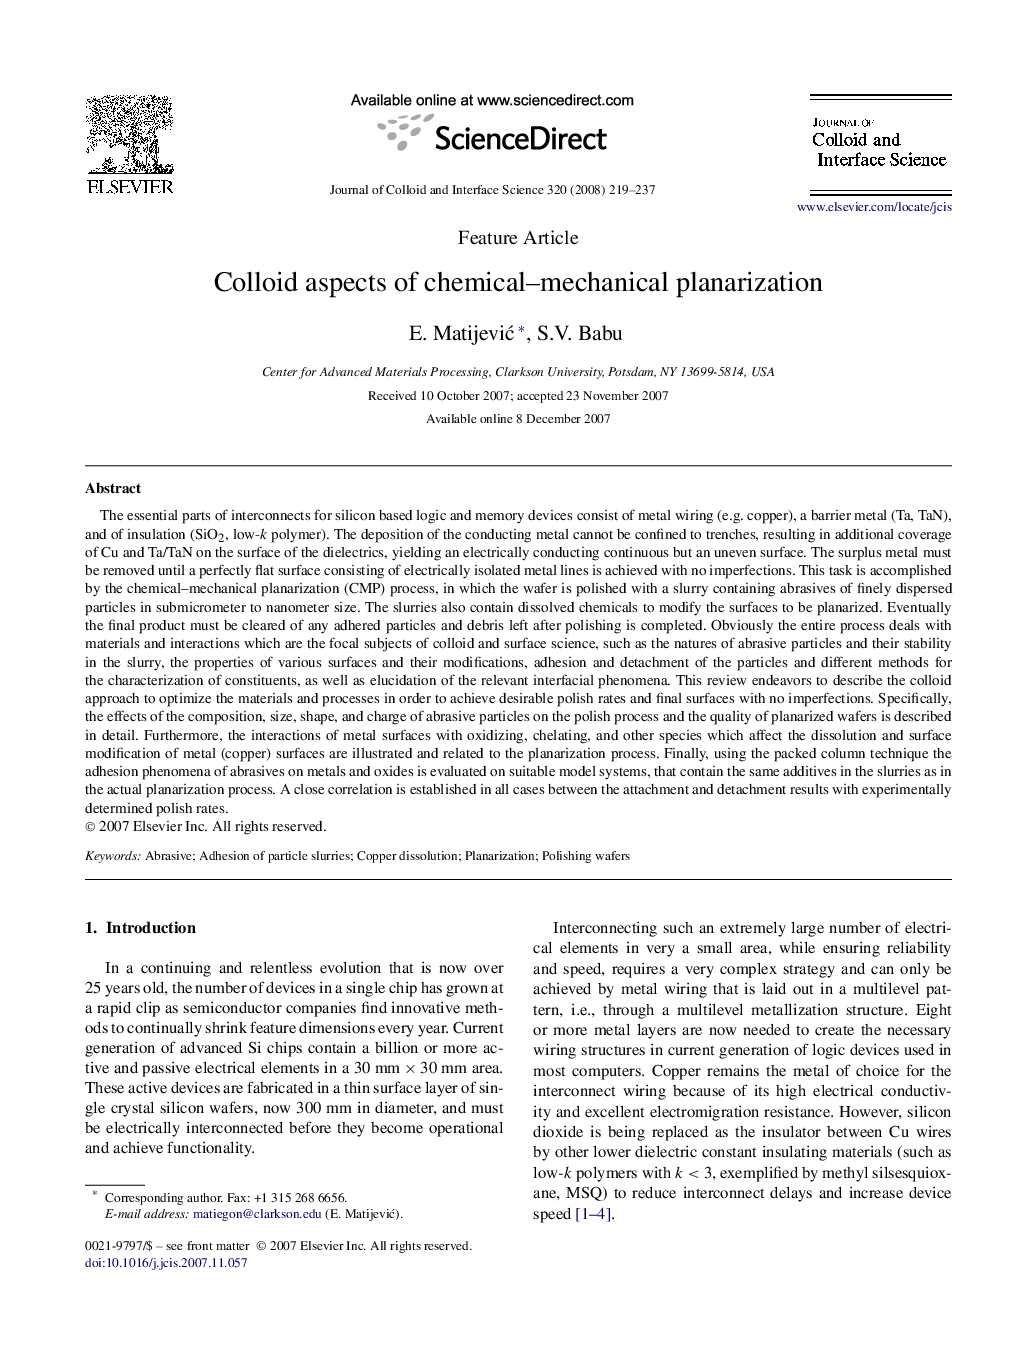 Colloid aspects of chemical-mechanical planarization